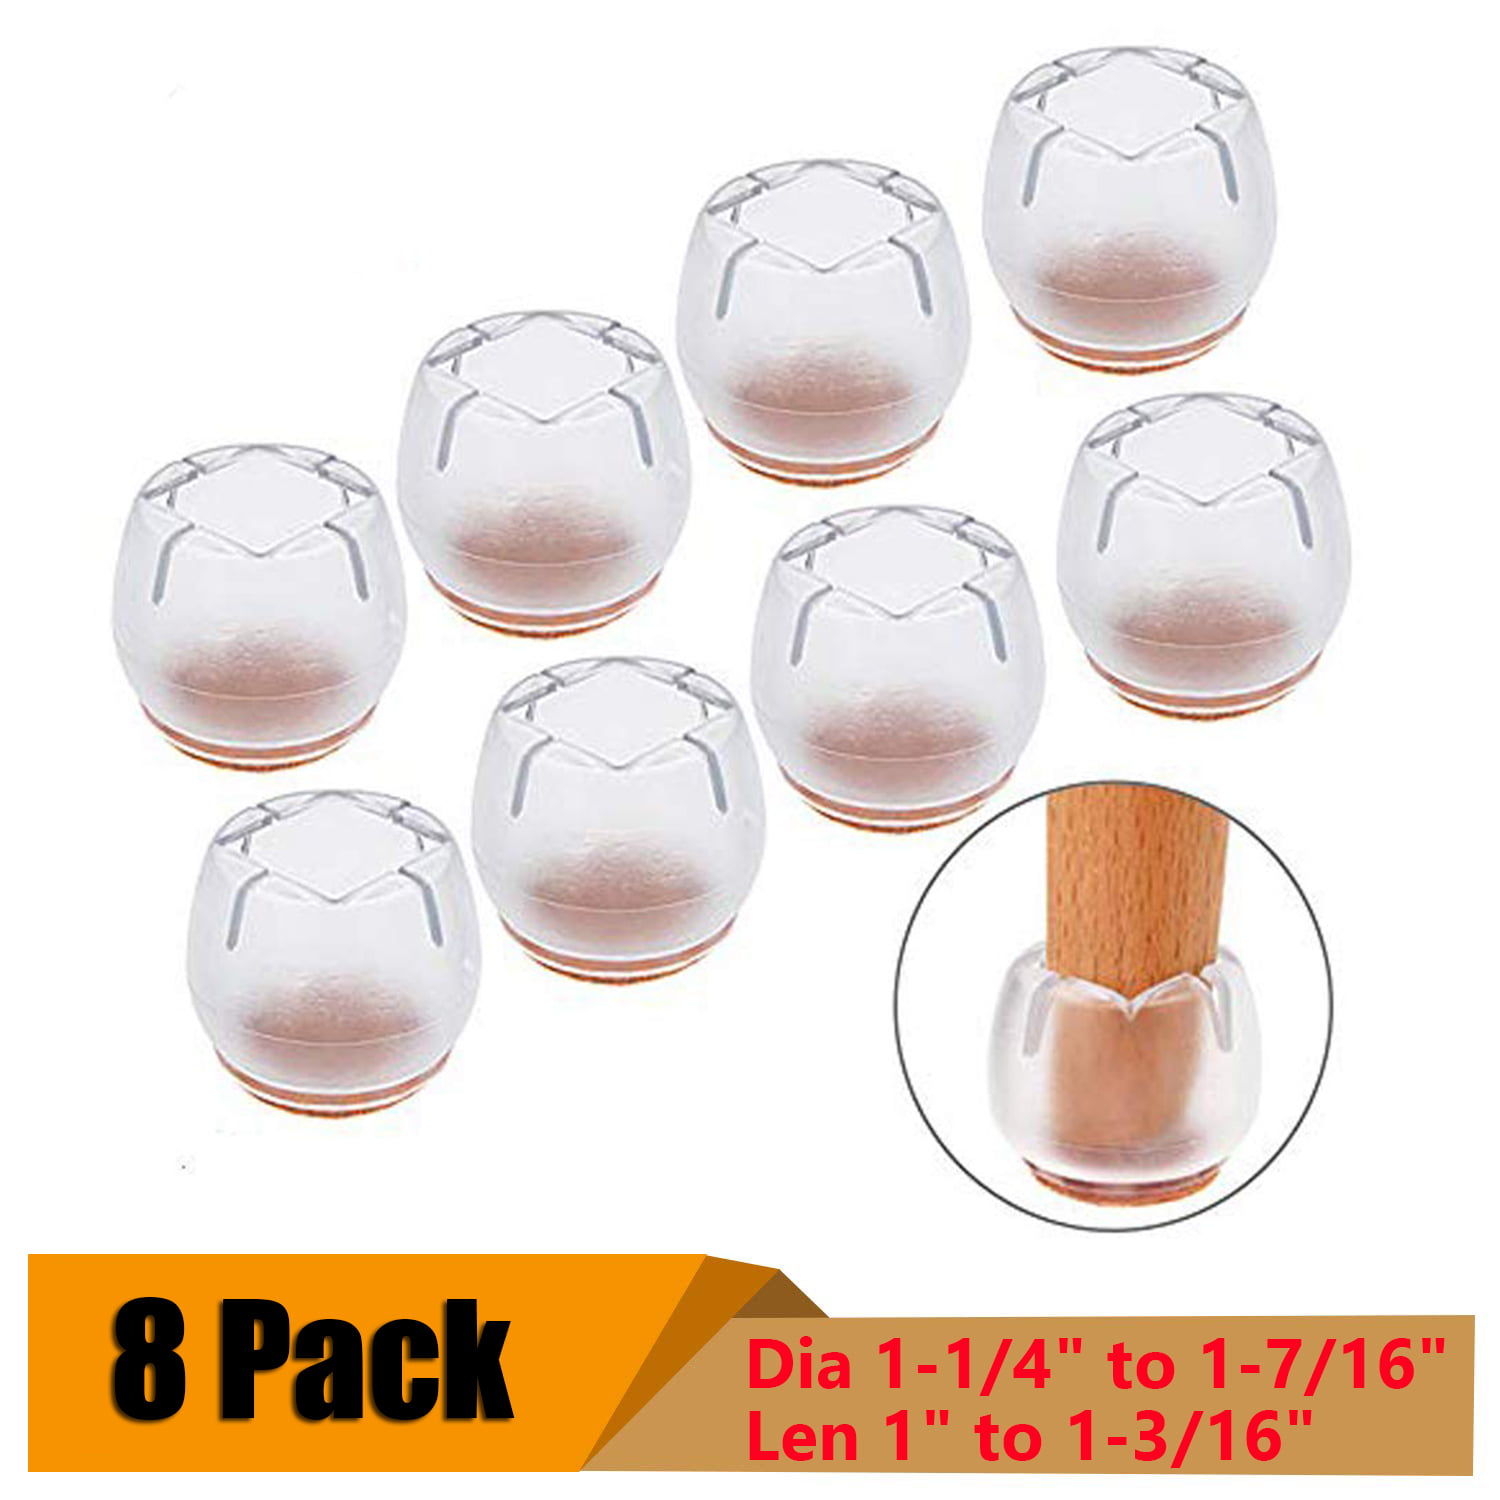 Details about   10 x Silicone Chair Leg Protectors Leg Caps Furniture Pads Floor Protector Tools 